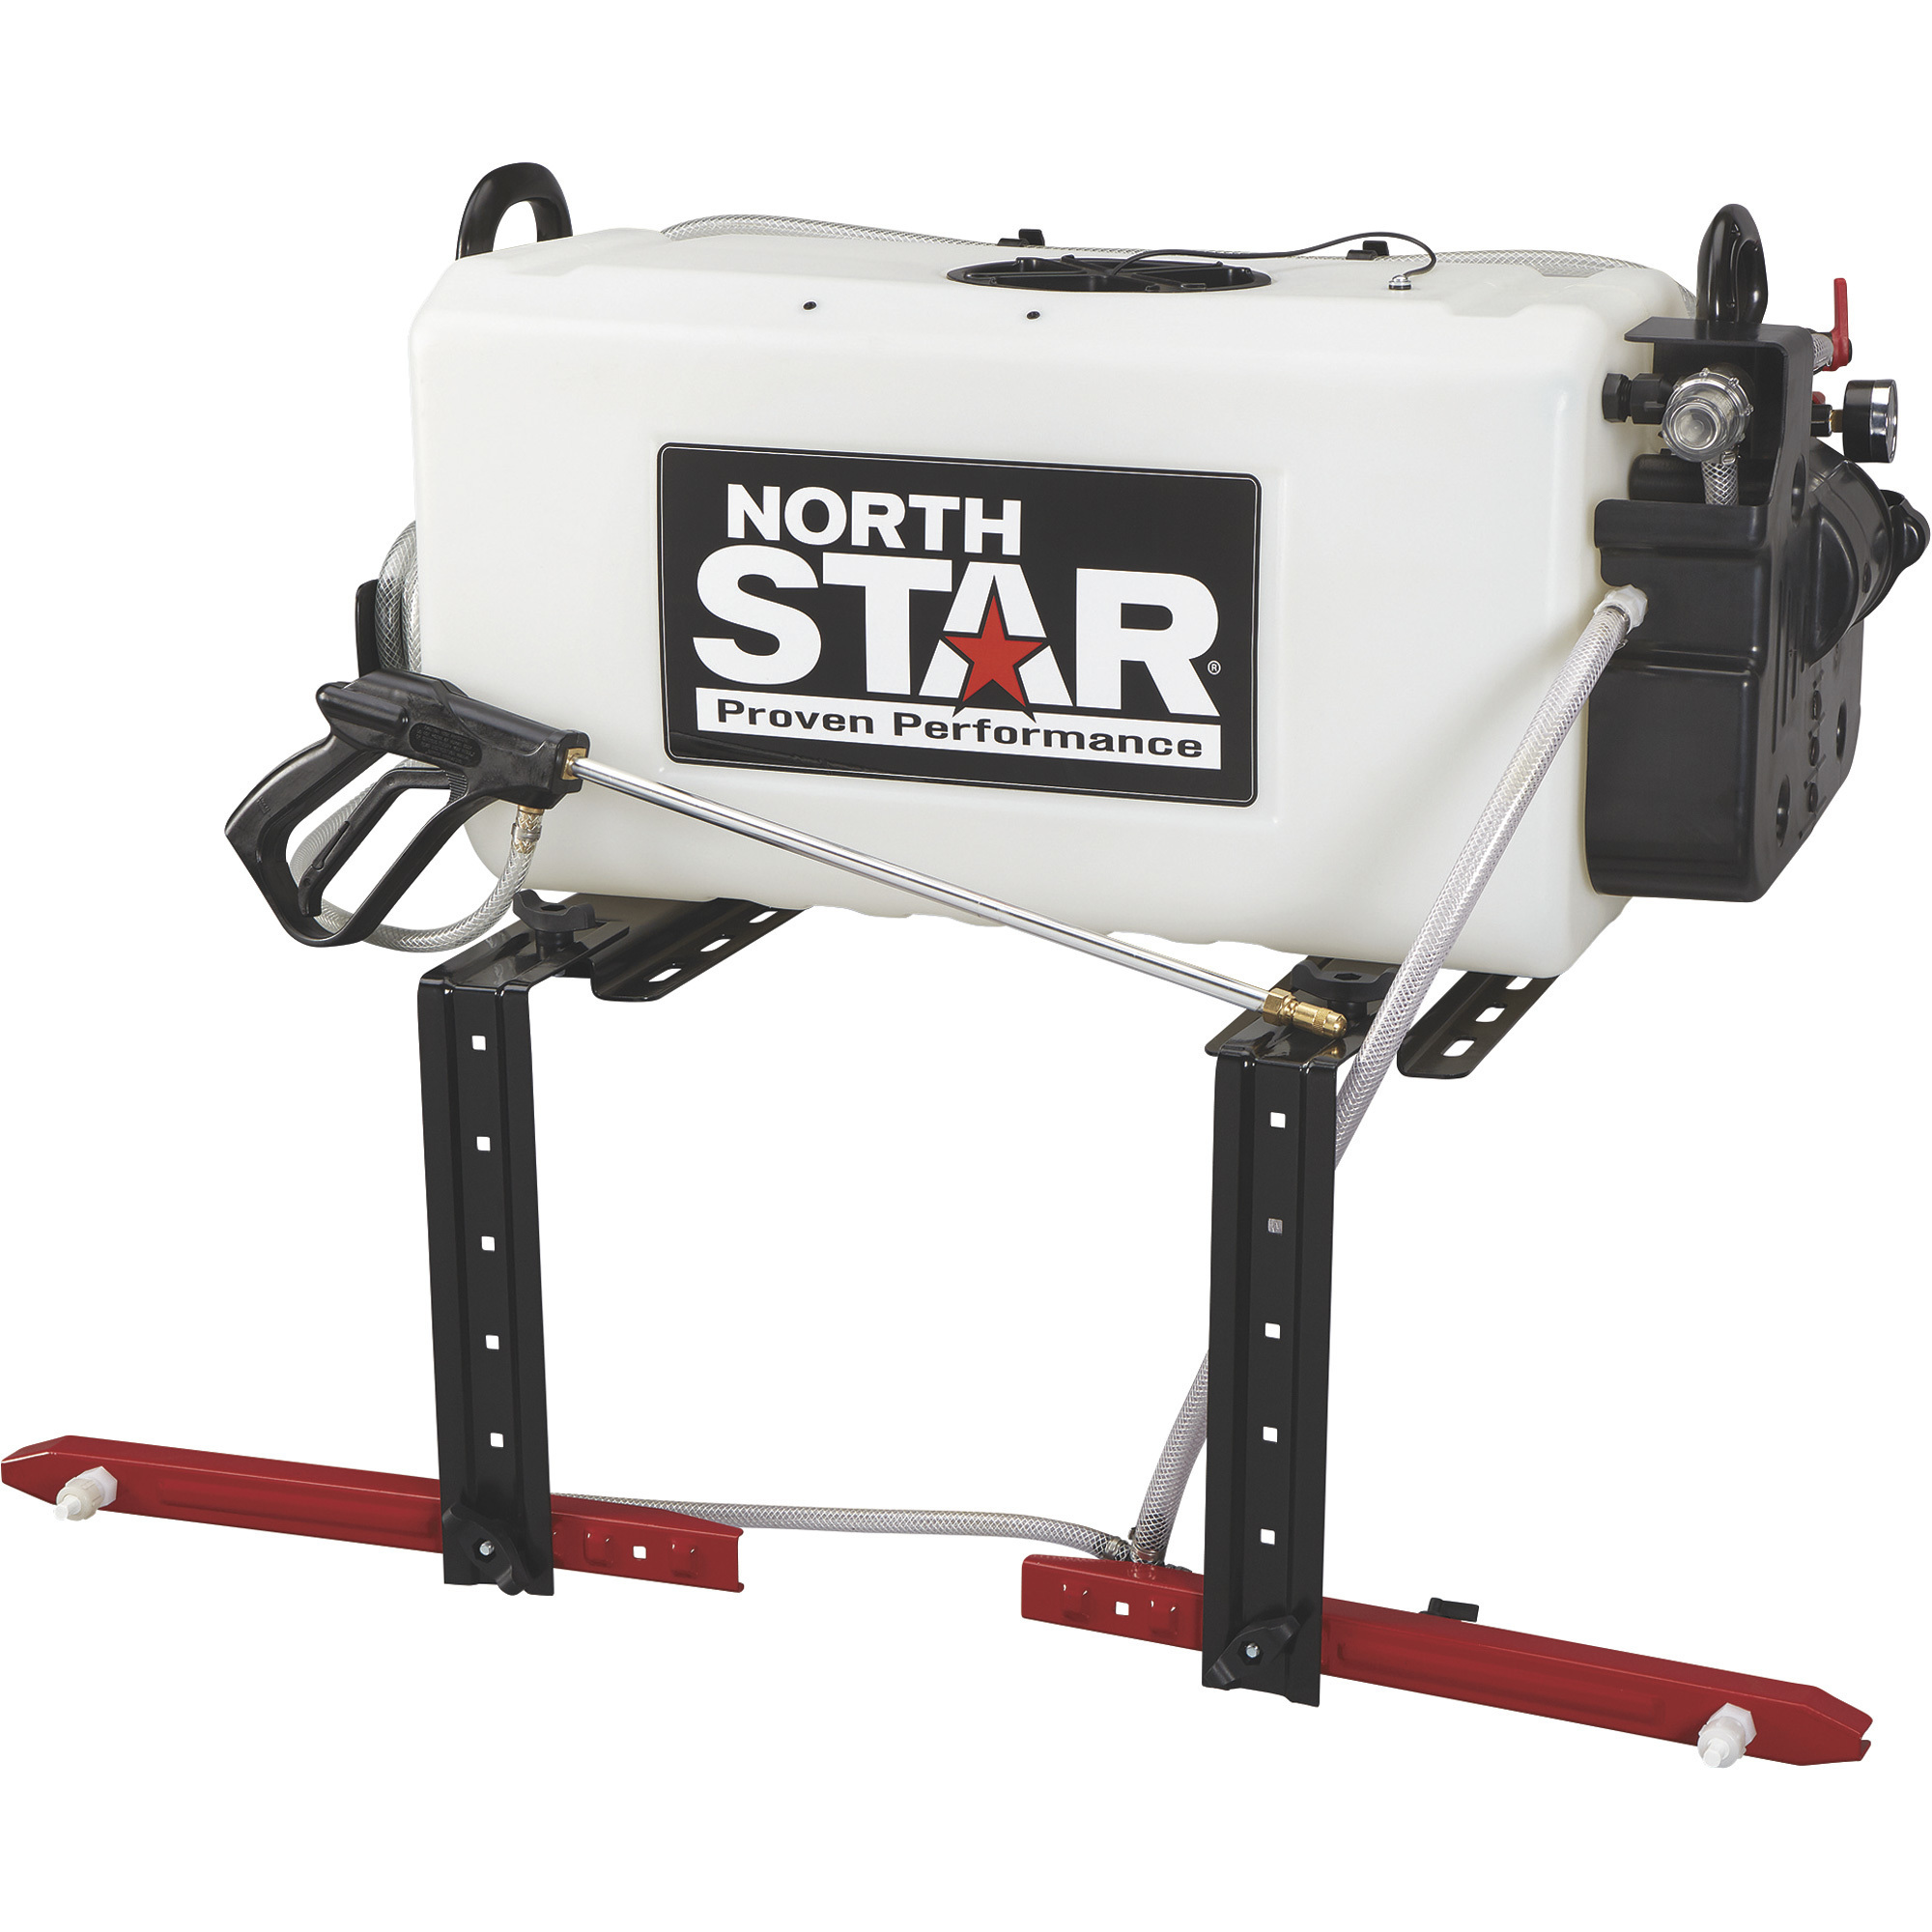 NorthStar ATV Broadcast and Spot Sprayer with 2-Nozzle Boomâ 26-Gallon Capacity, 2.2 GPM, 12 Volts